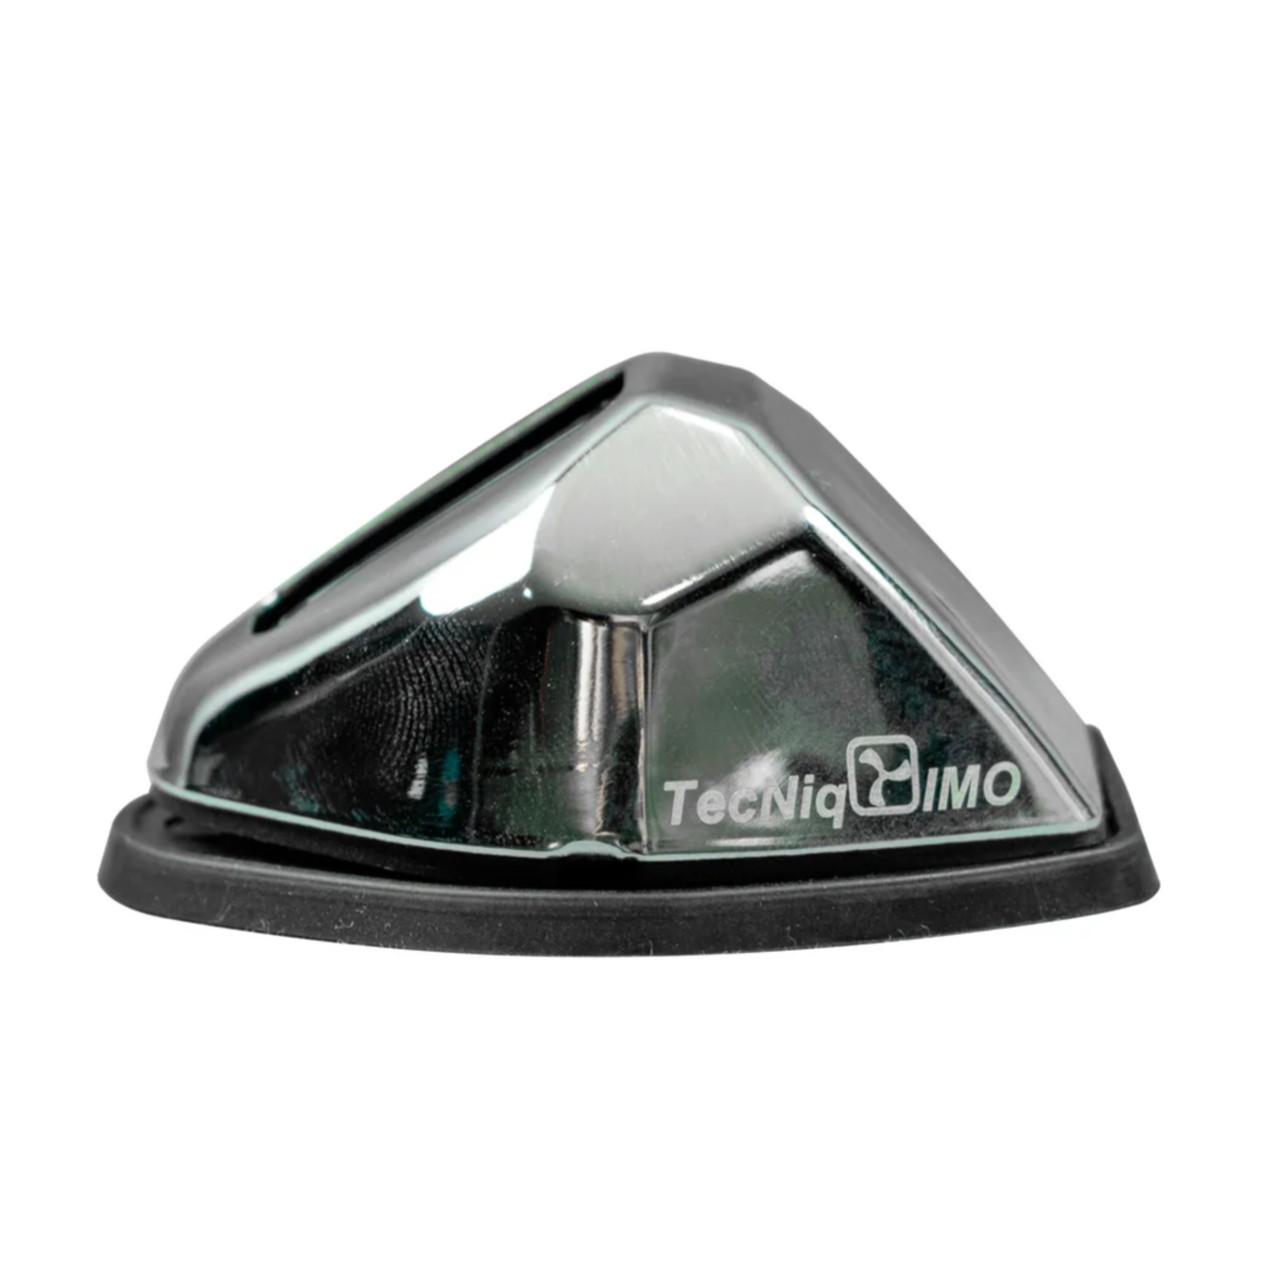 Tecniq New OEM Starboard Side Navigation Light Side Mount W/ Stainless Cover, M21-GSS0-1